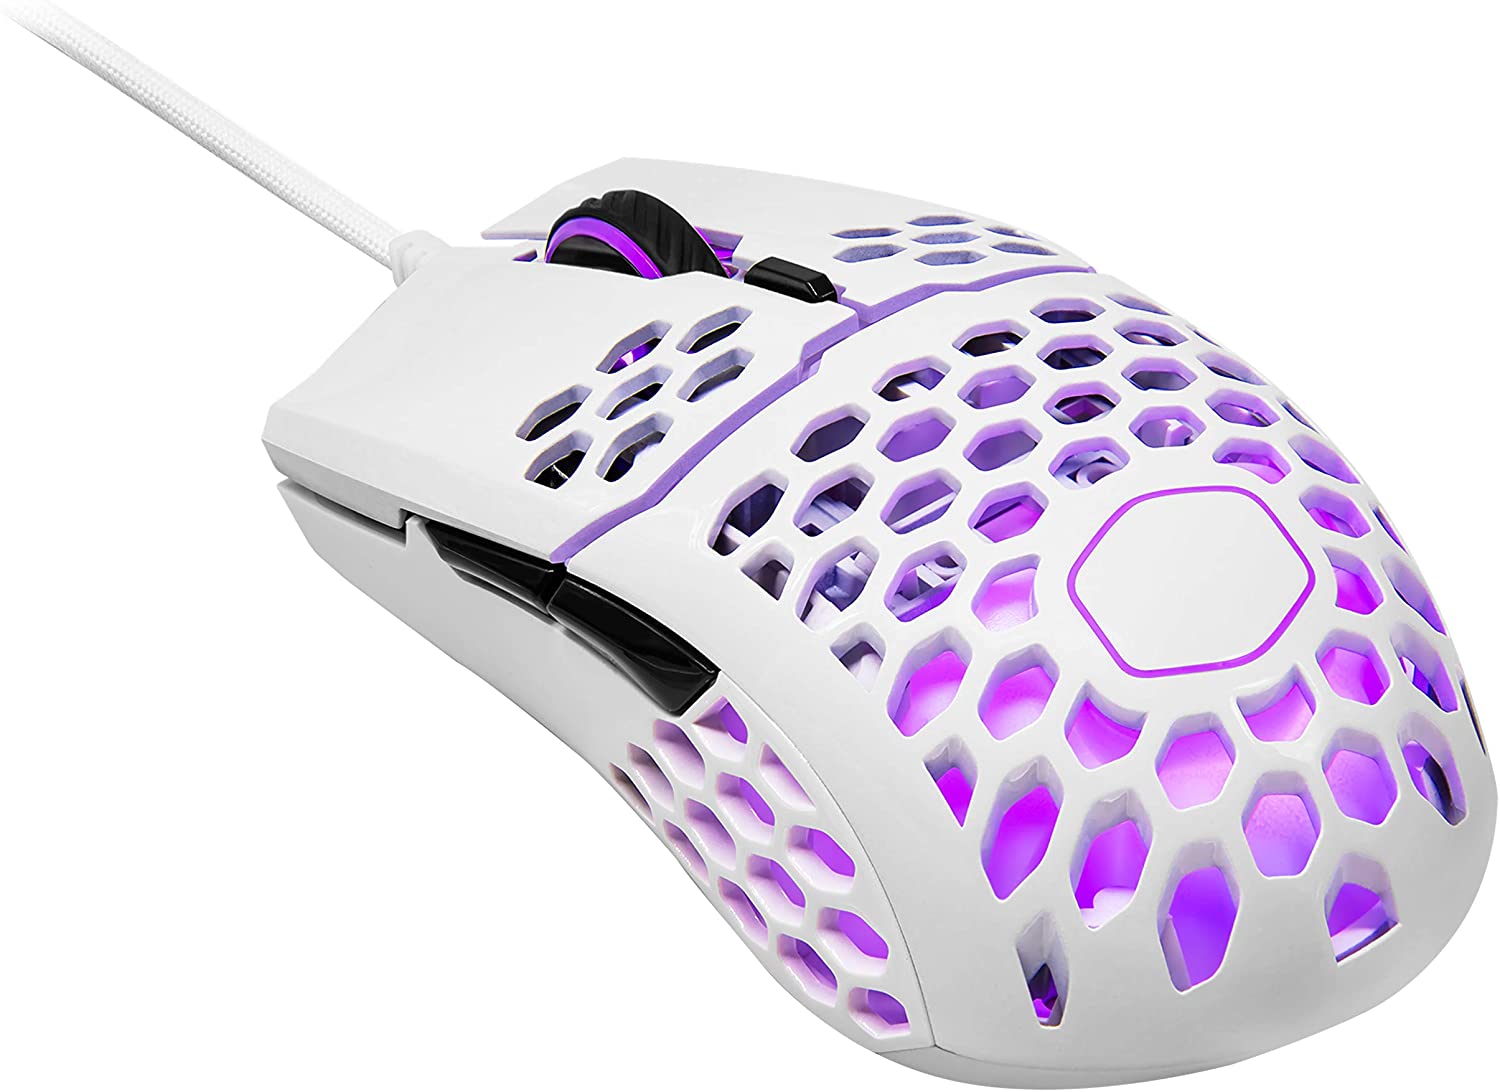 COOLER MASTER MM711 GAMING MOUSE